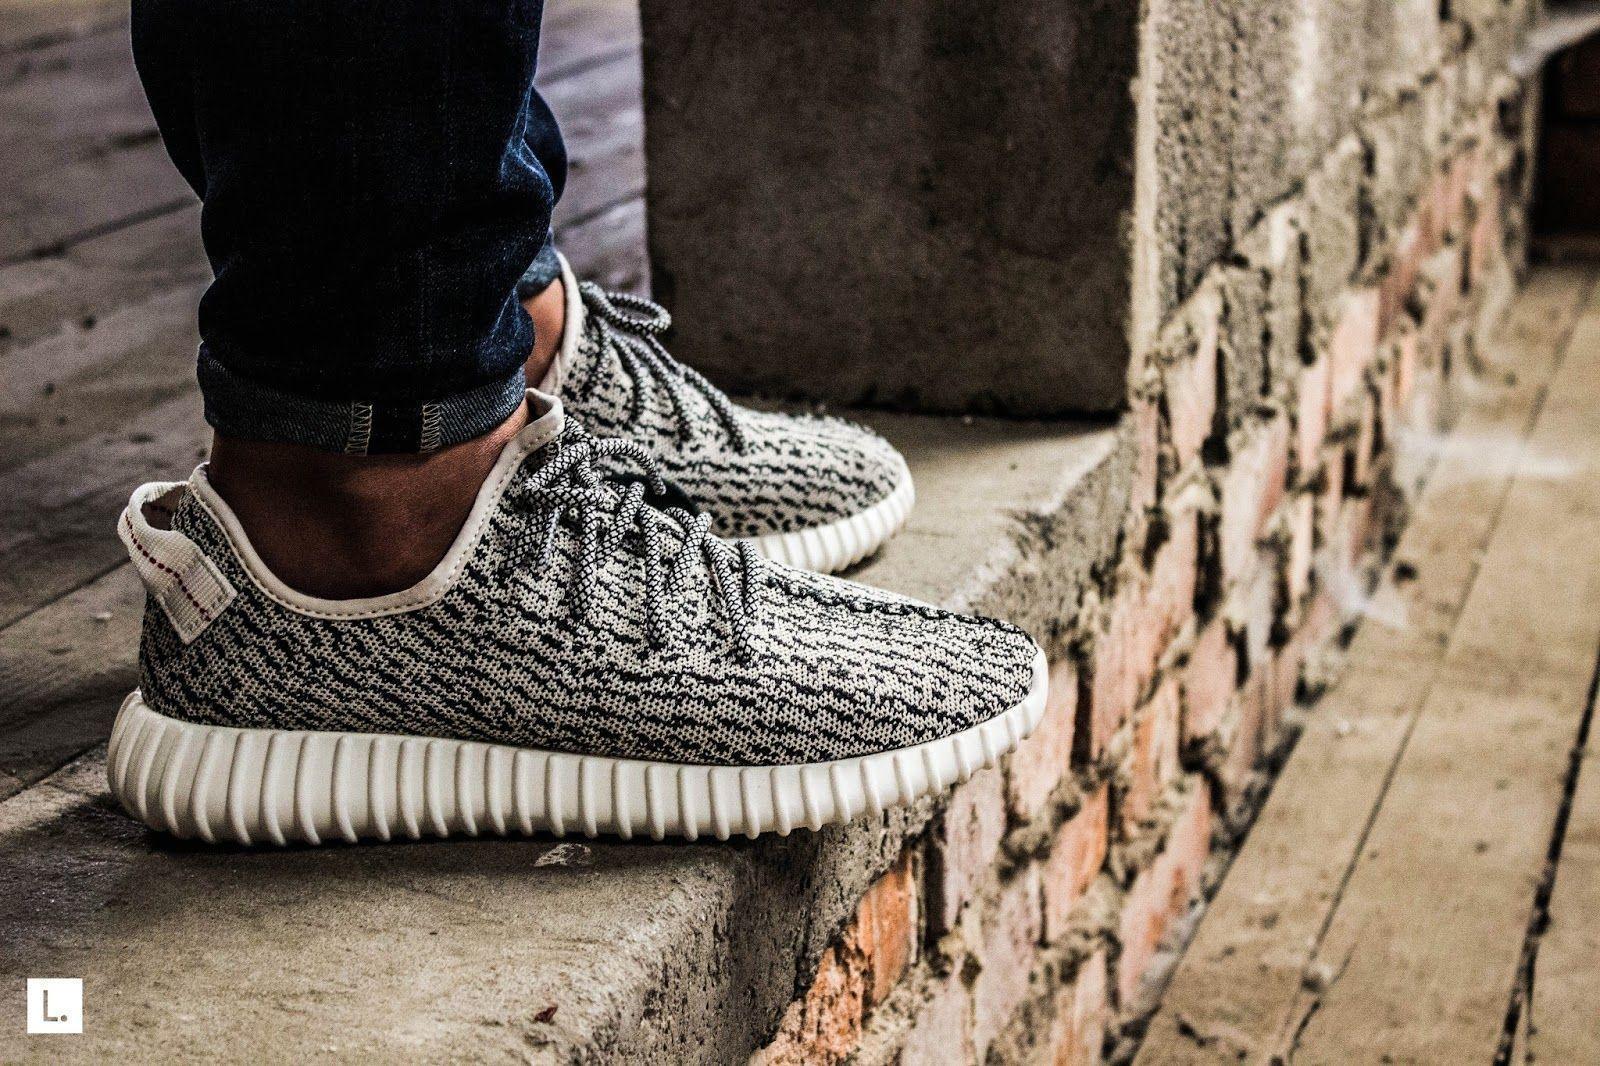 ADIDAS YEEZY BOOST 350 BY KANYE WEST